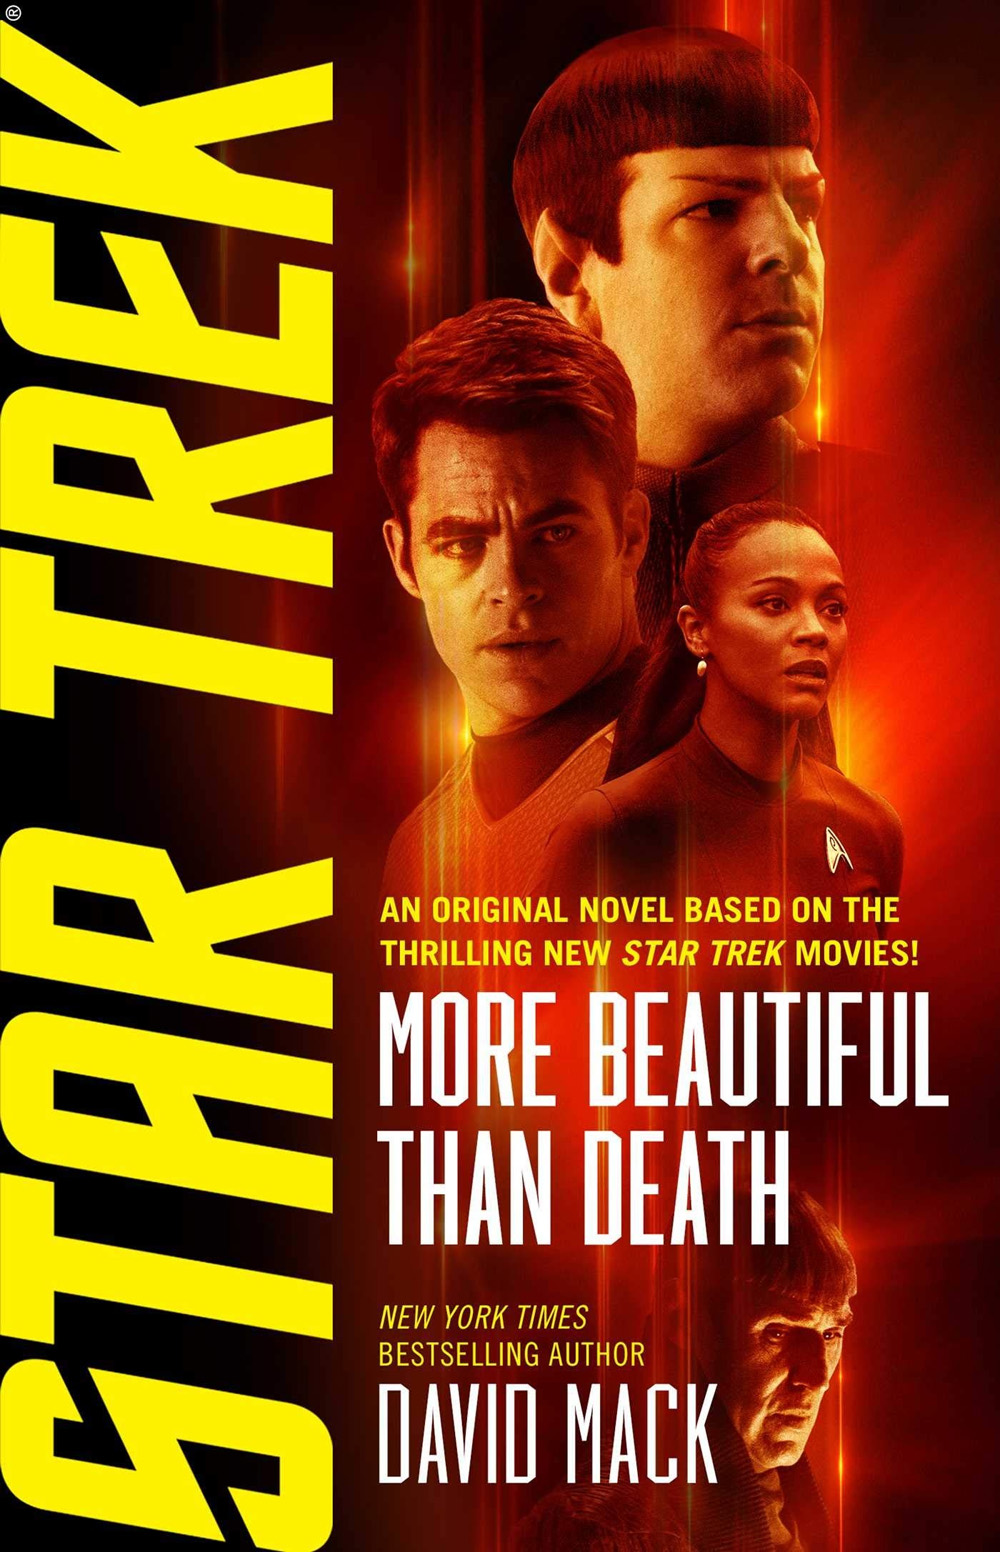 More Beautiful Than Death (Sep 2020)